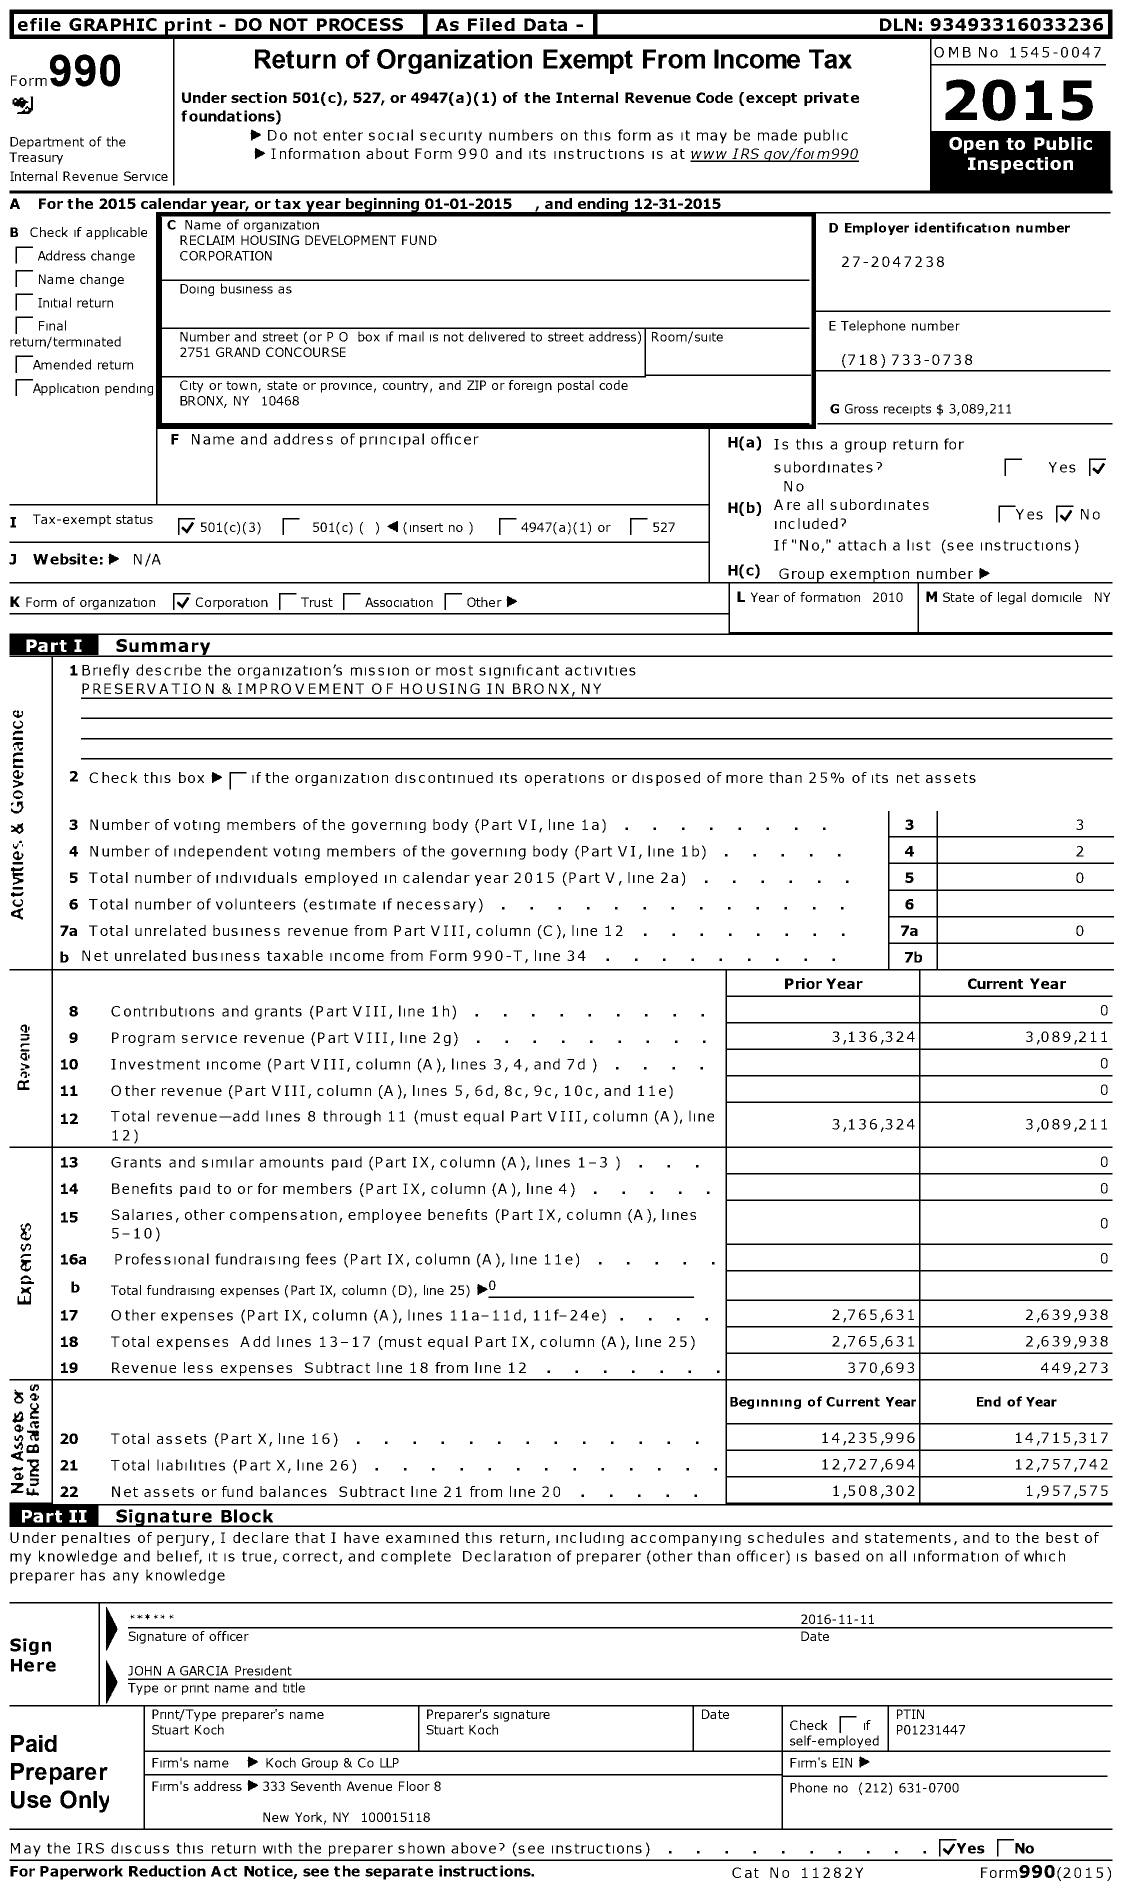 Image of first page of 2015 Form 990 for Reclaim Housing Development Fund Corporation